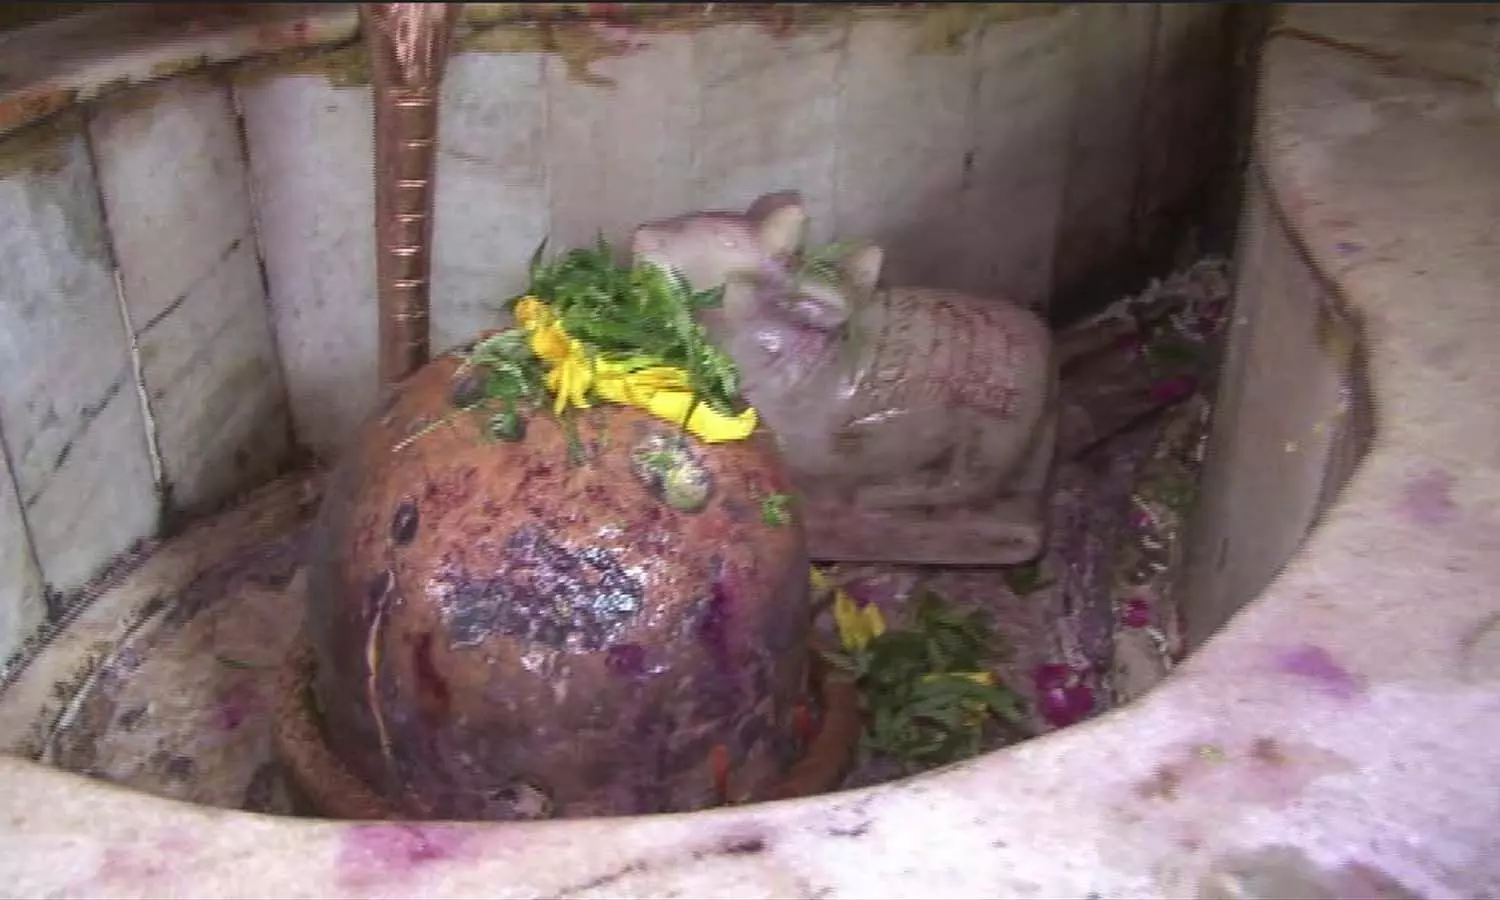 Bholenath, who was a waste, the British had opened fire on the Shivling of the temple.